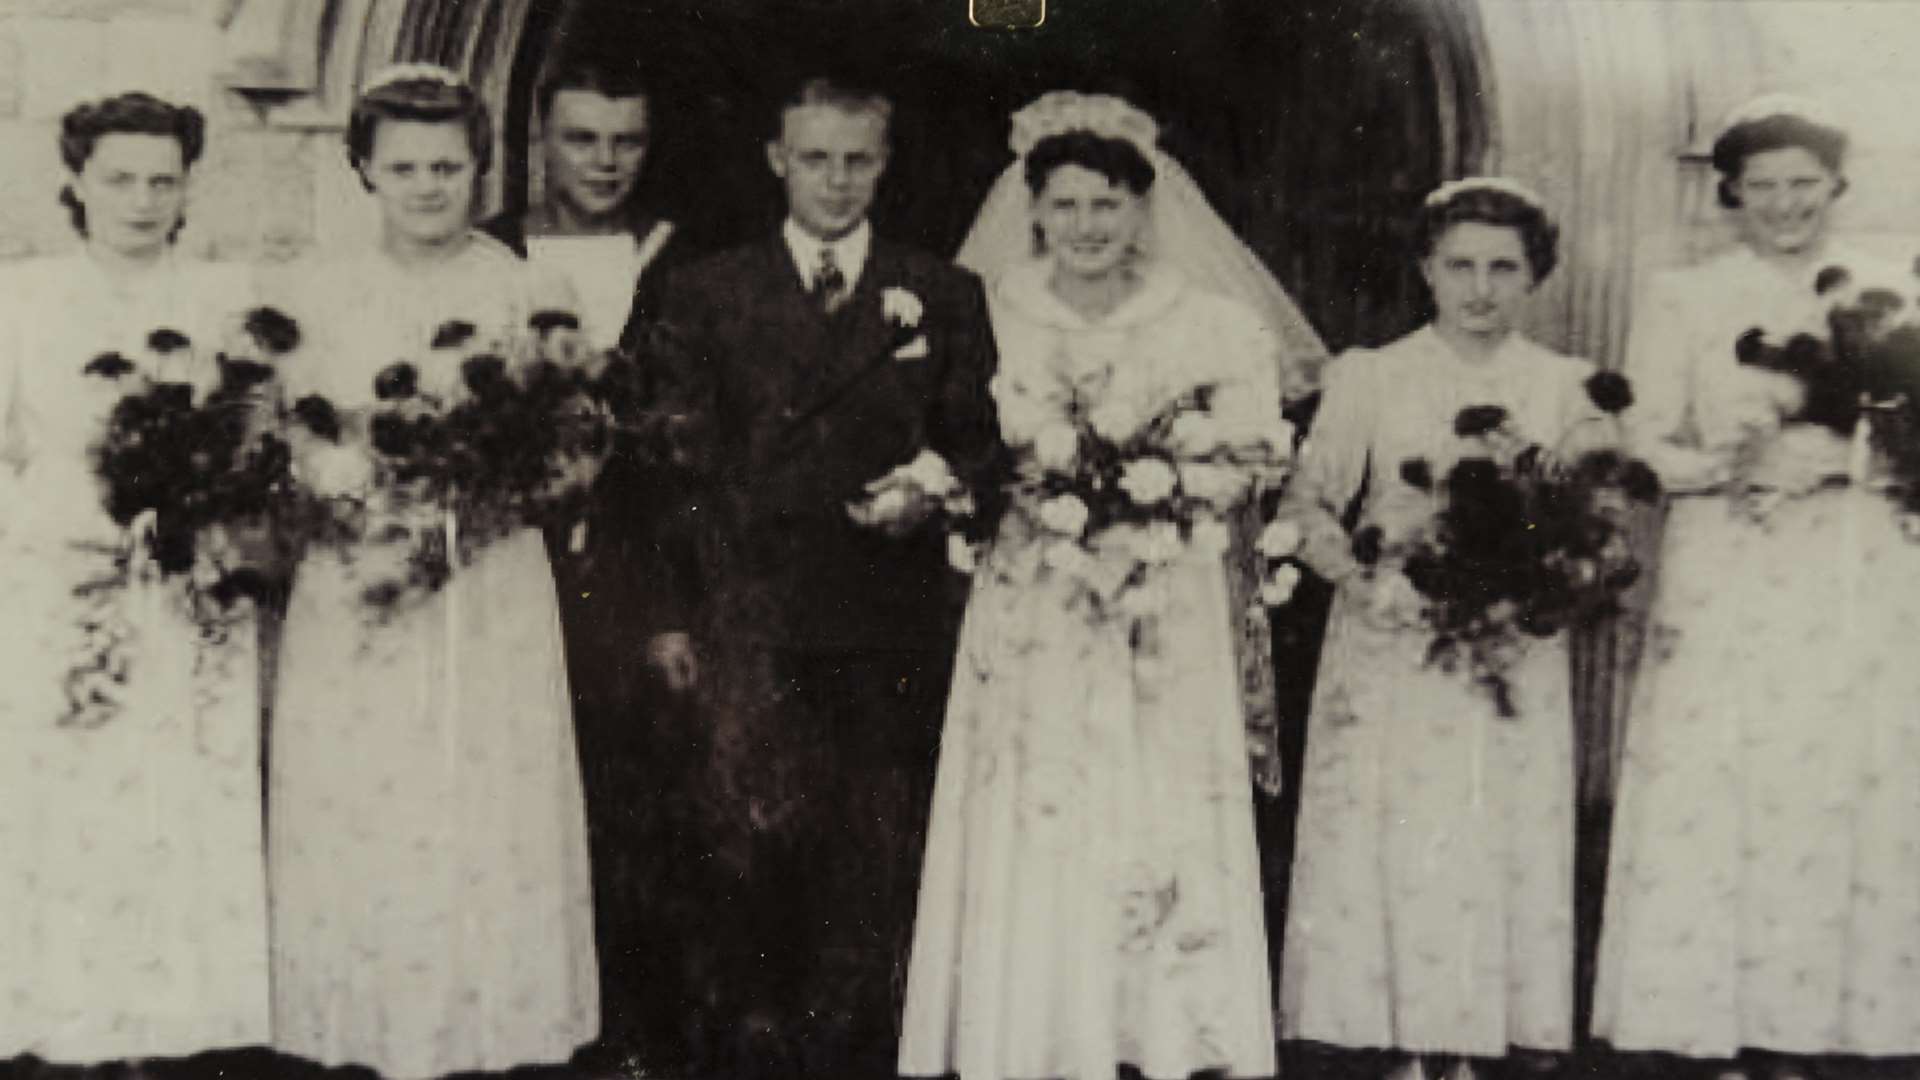 Peter and Dora, with the best man and bridesmaids, outside St Botolph's Church, Northfleet